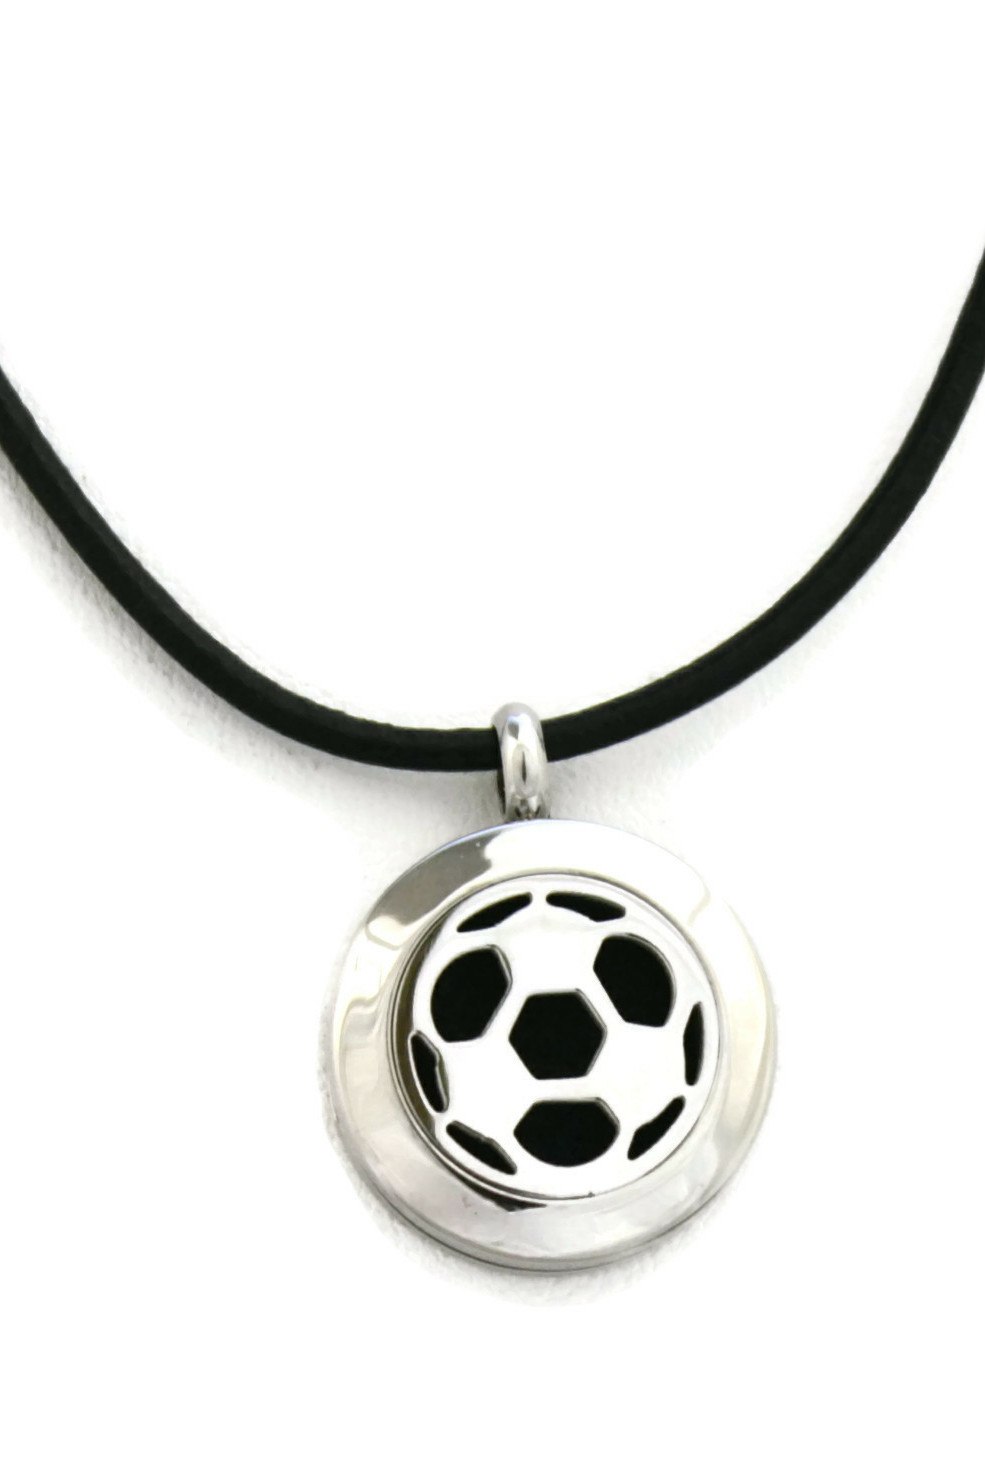 Soccer Small Stainless Steel Essential Oil Diffuser Necklace-20mm- 18-20"-Diffuser Necklace-Destination Oils